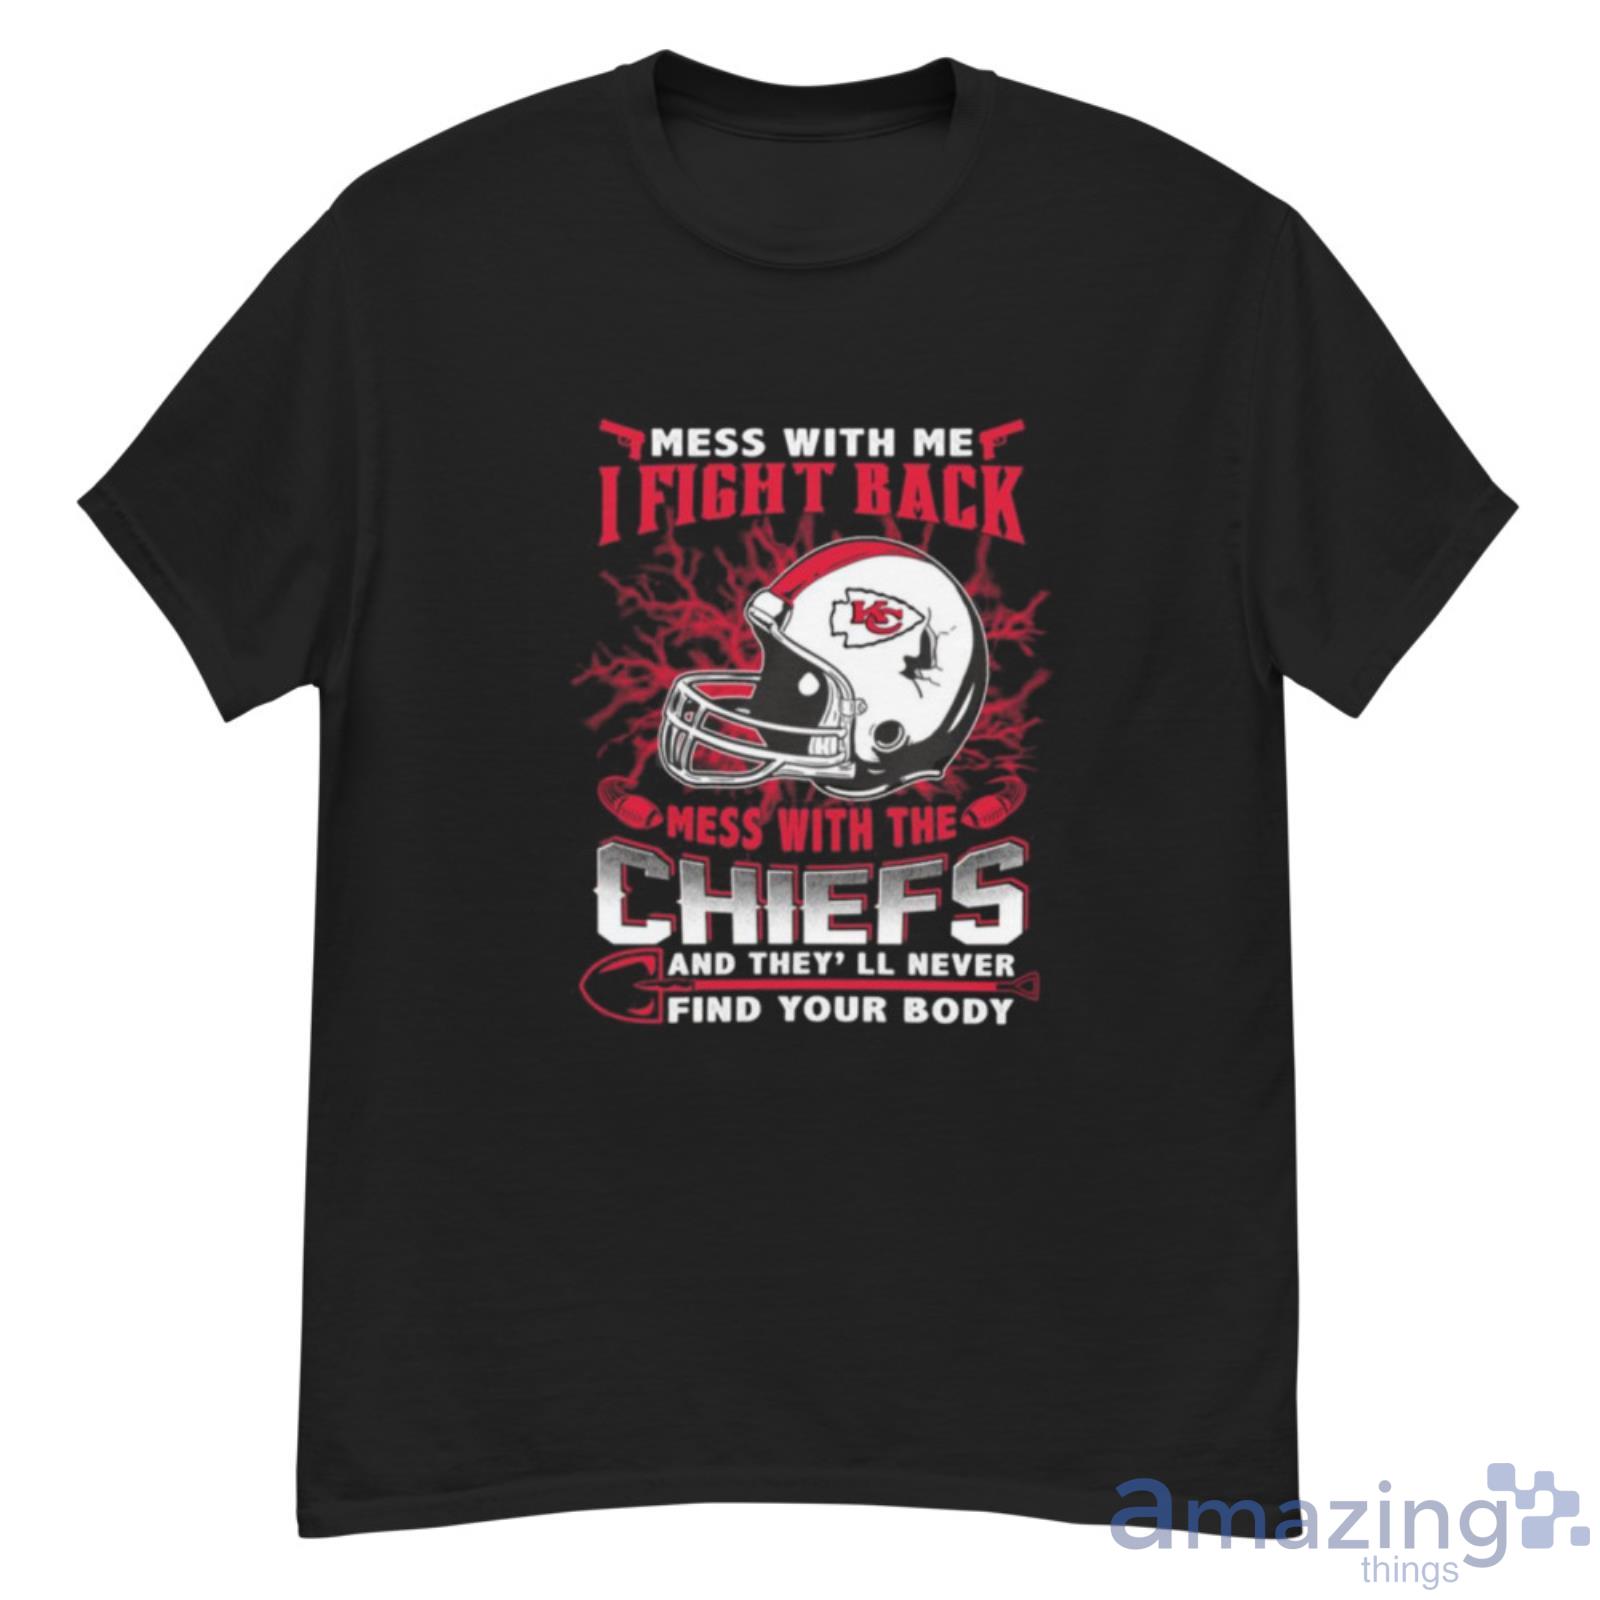 Nfl Football Kansas City Chiefs Mess With Me I Fight Back Mess With My Team  And They'll Never Find Your Body Shirt T Shirt